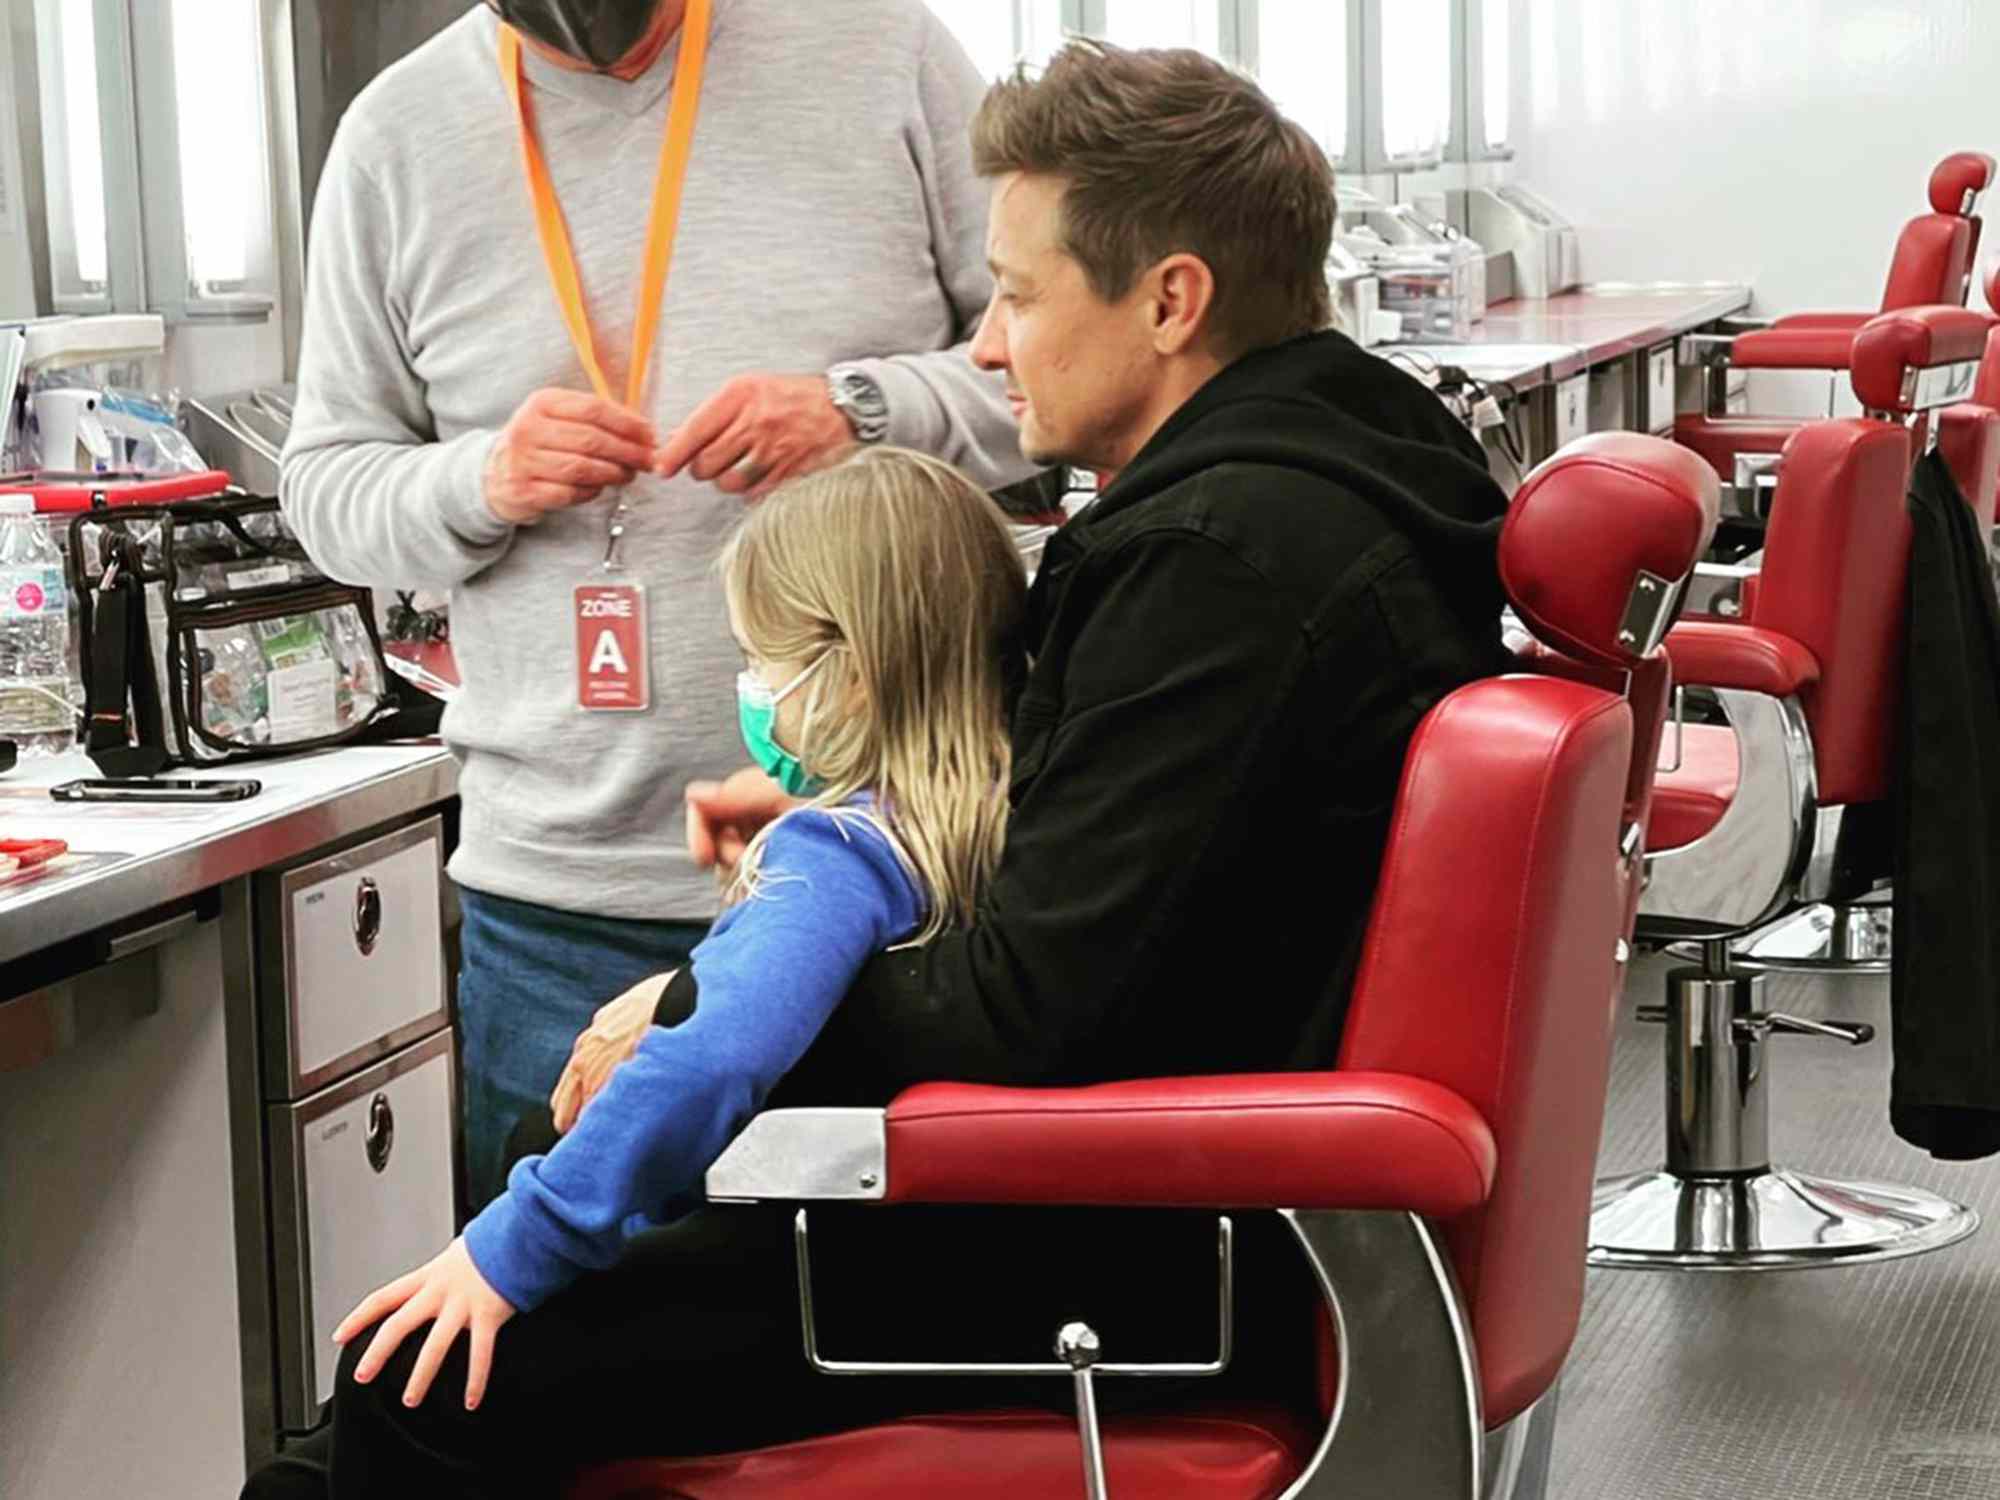 Jeremy Renner and his daughter Ava